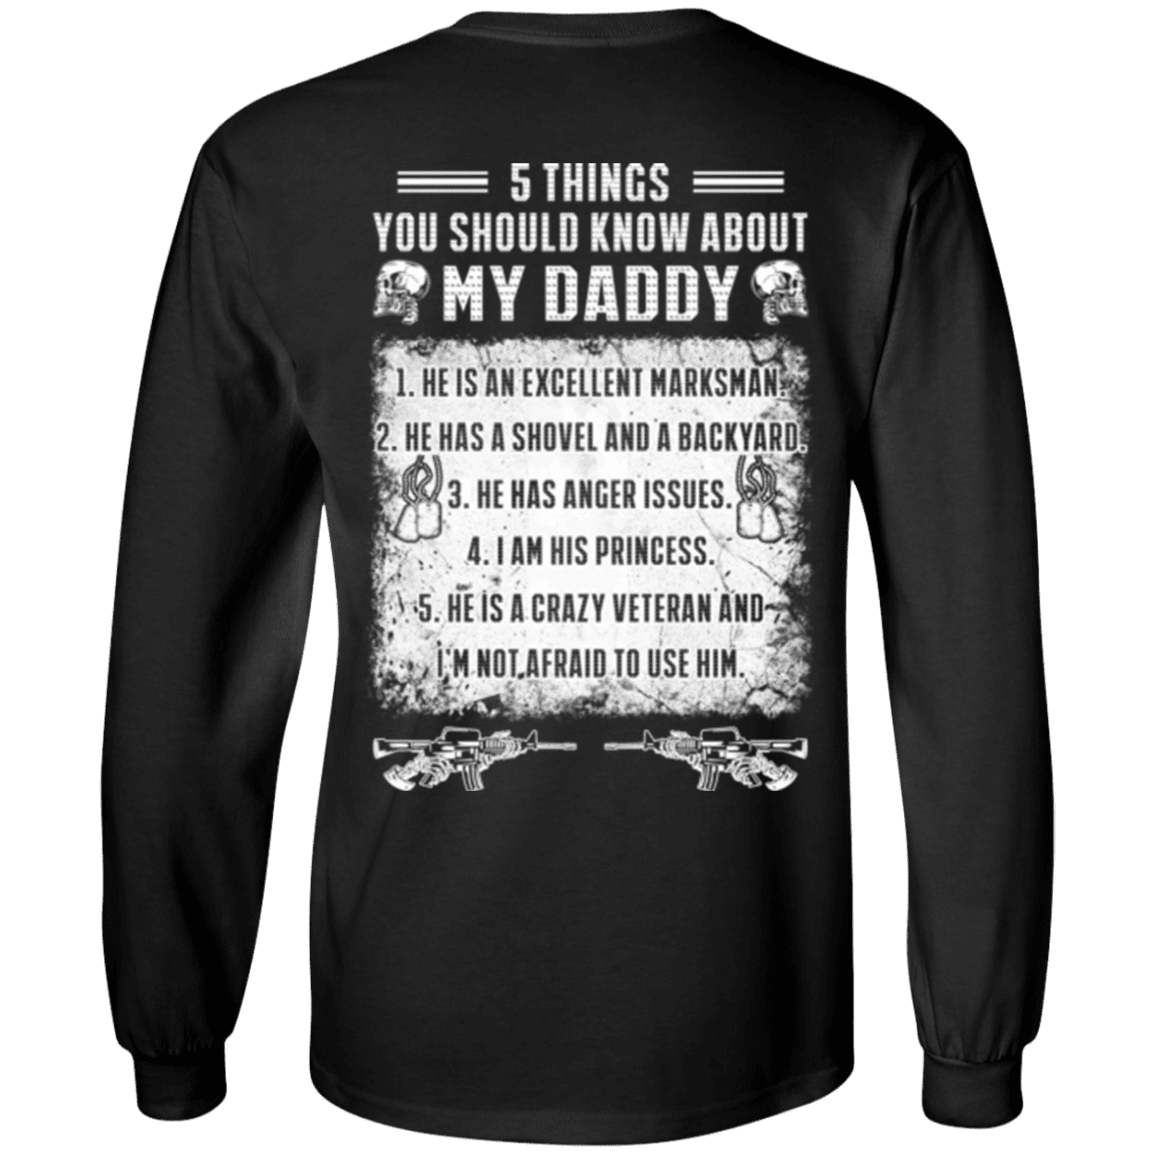 Military T-Shirt "5 Things You Should Know About My Daddy Veteran"-TShirt-General-Veterans Nation